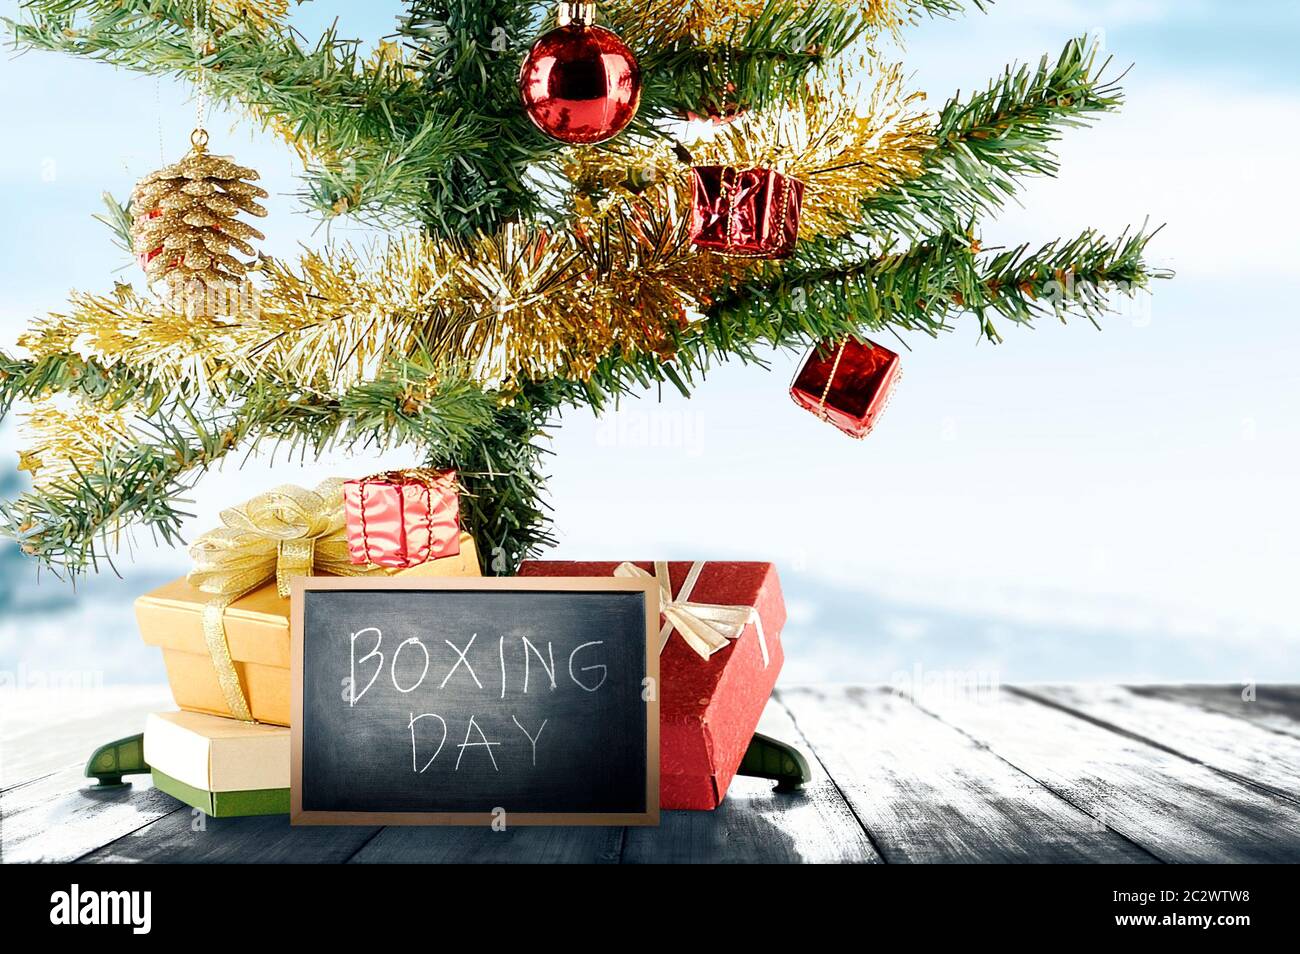 Christmas tree with gift box and Boxing Day text on the blackboard on wooden floor with a snowy background Stock Photo